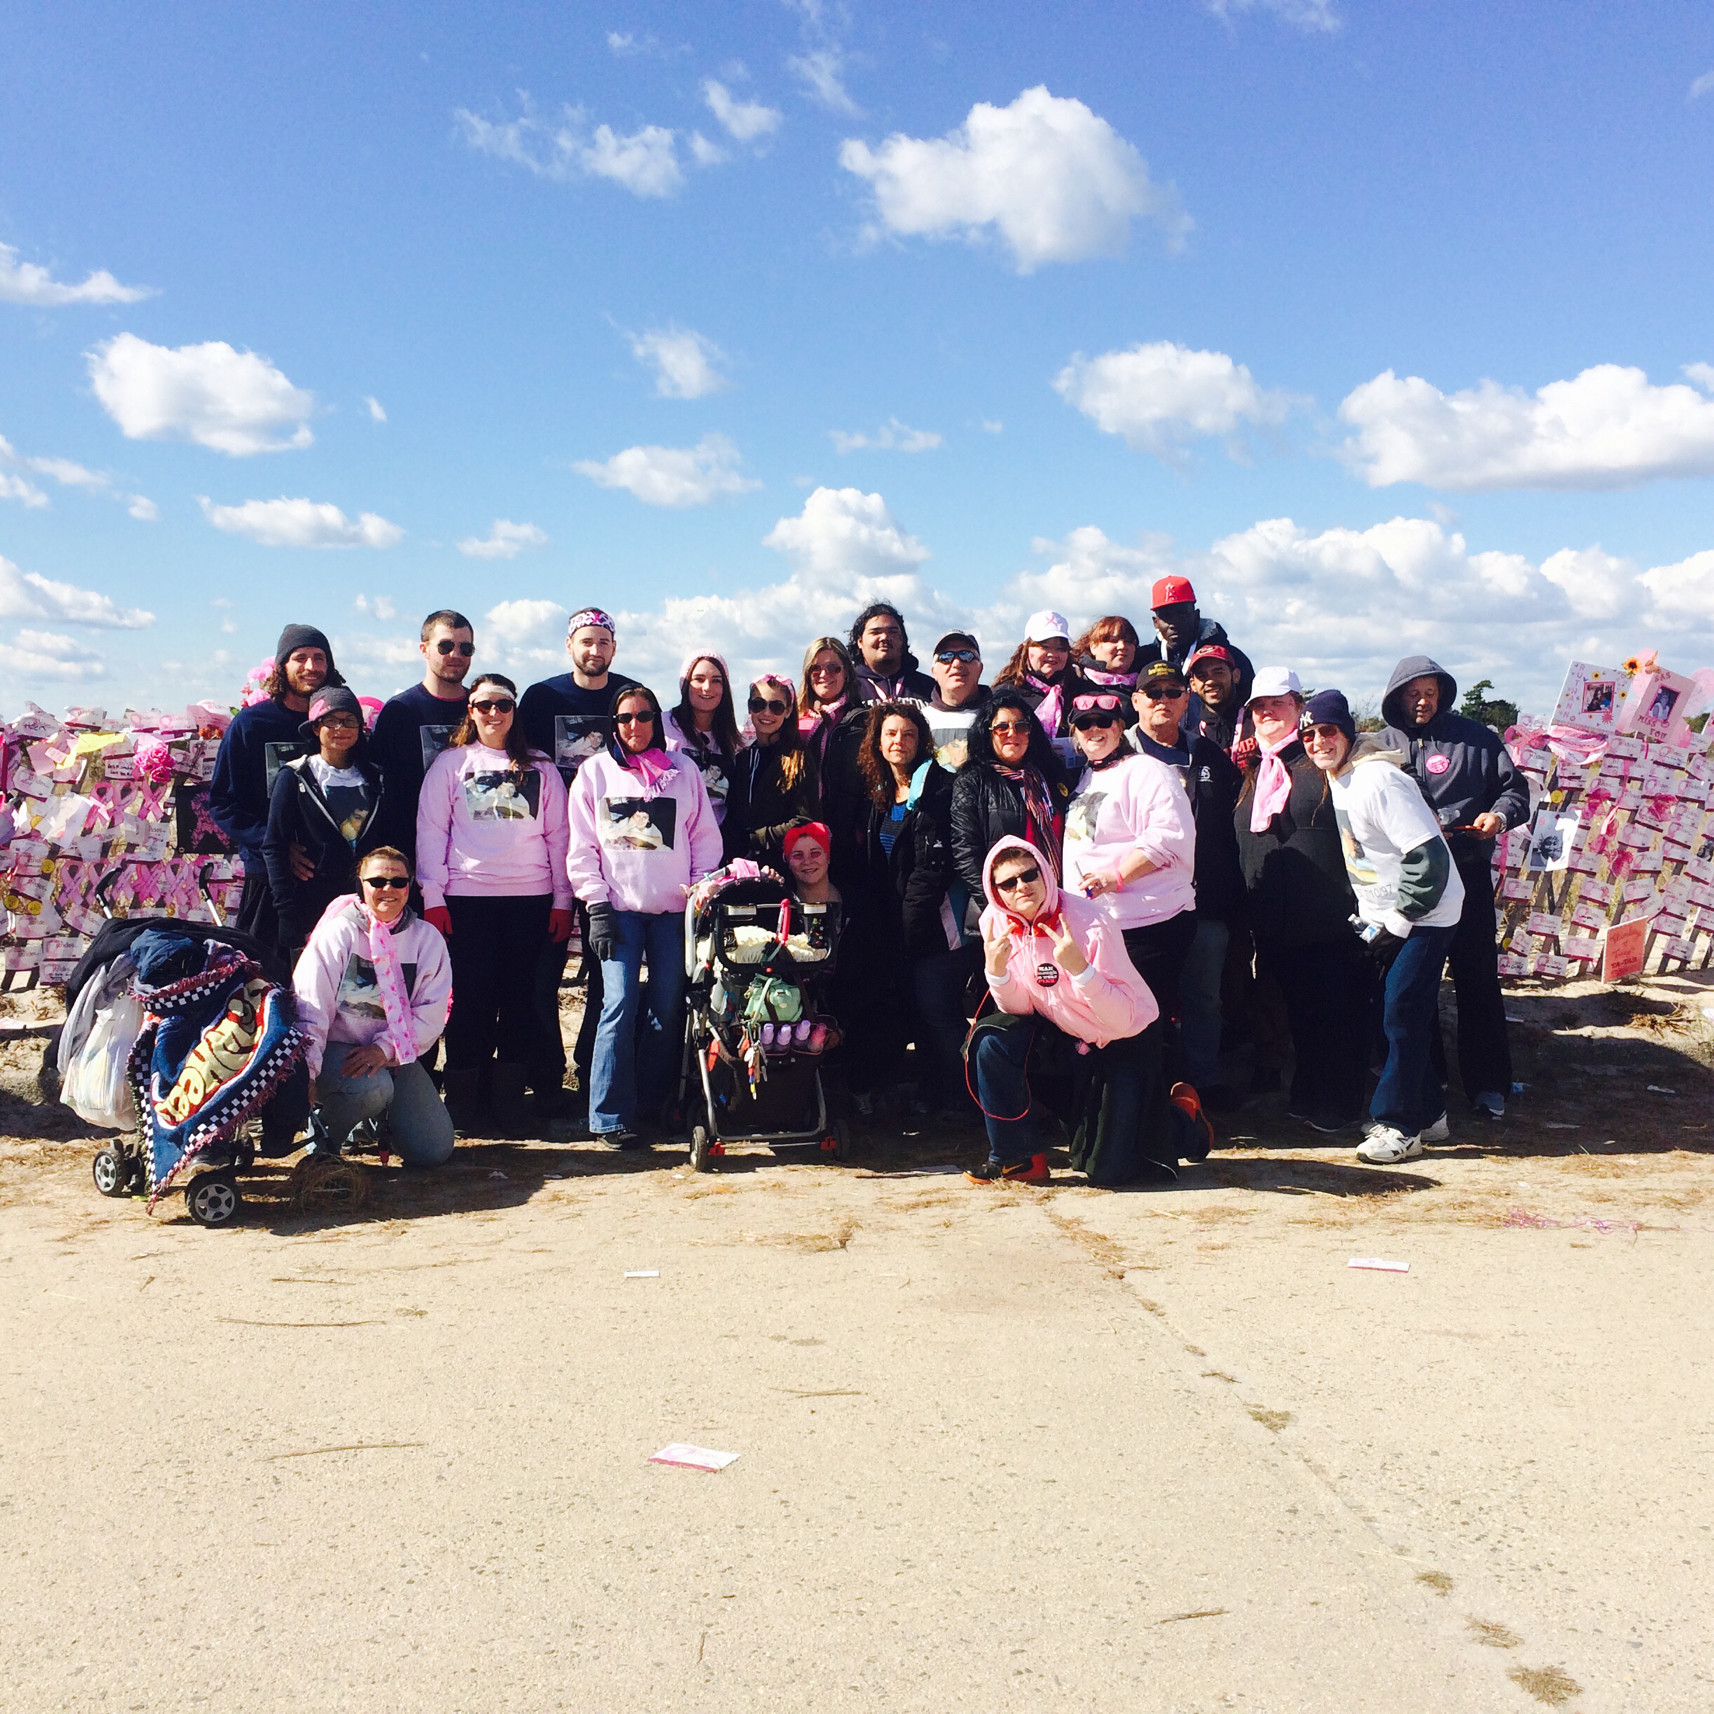 A team walked in honor of former Seaford resident Joan Bonafede at the Making Strides of Long Island Walk at Jones Beach last Sunday to raise money and awareness for breast cancer.